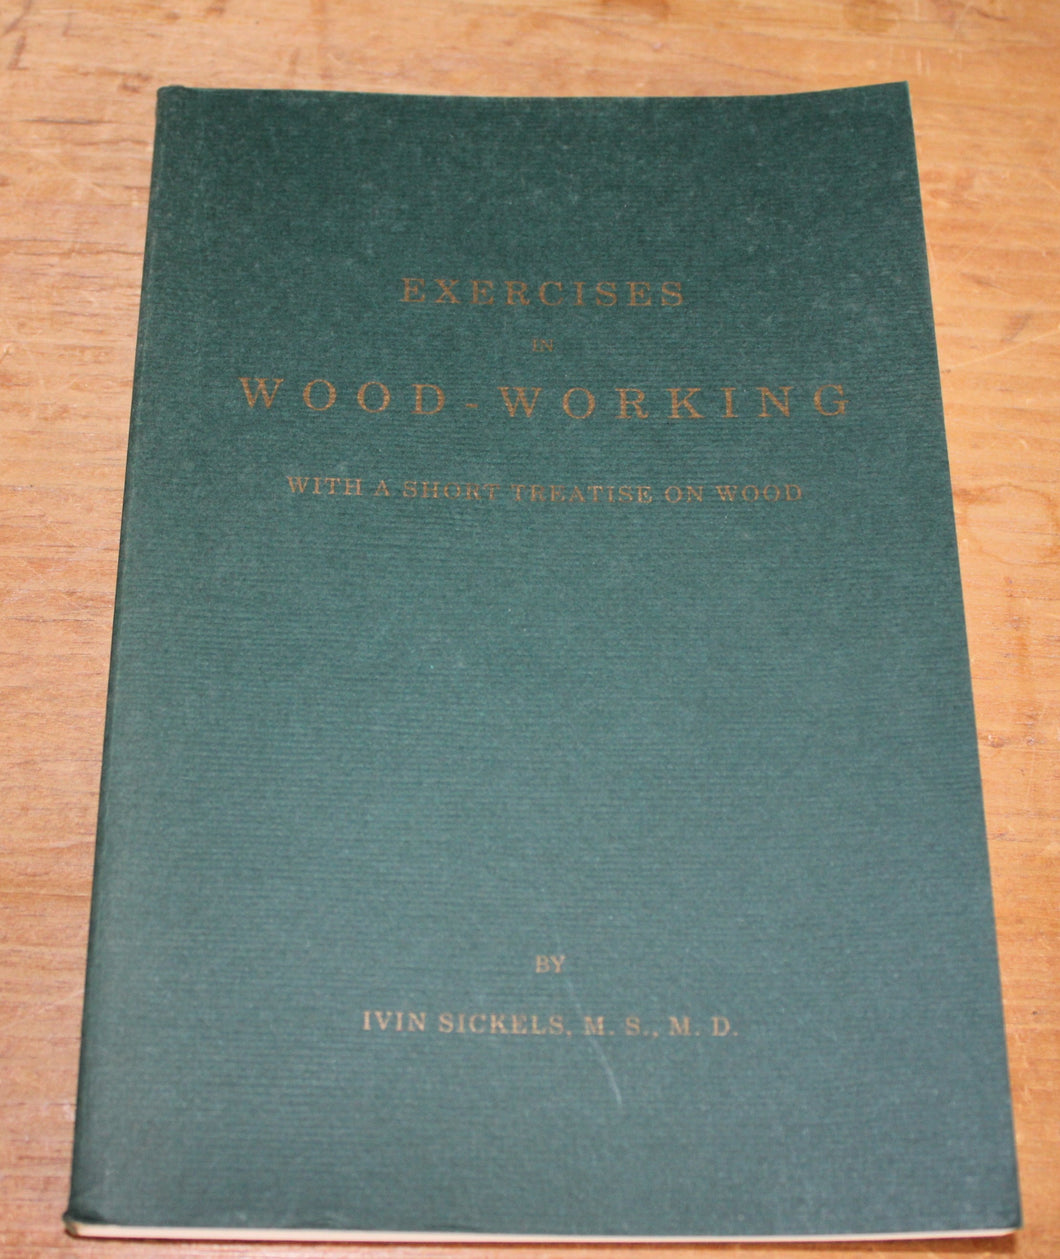 Exercises In Wood Working By Ivin Sickels, Ms. M.D (Reprint)